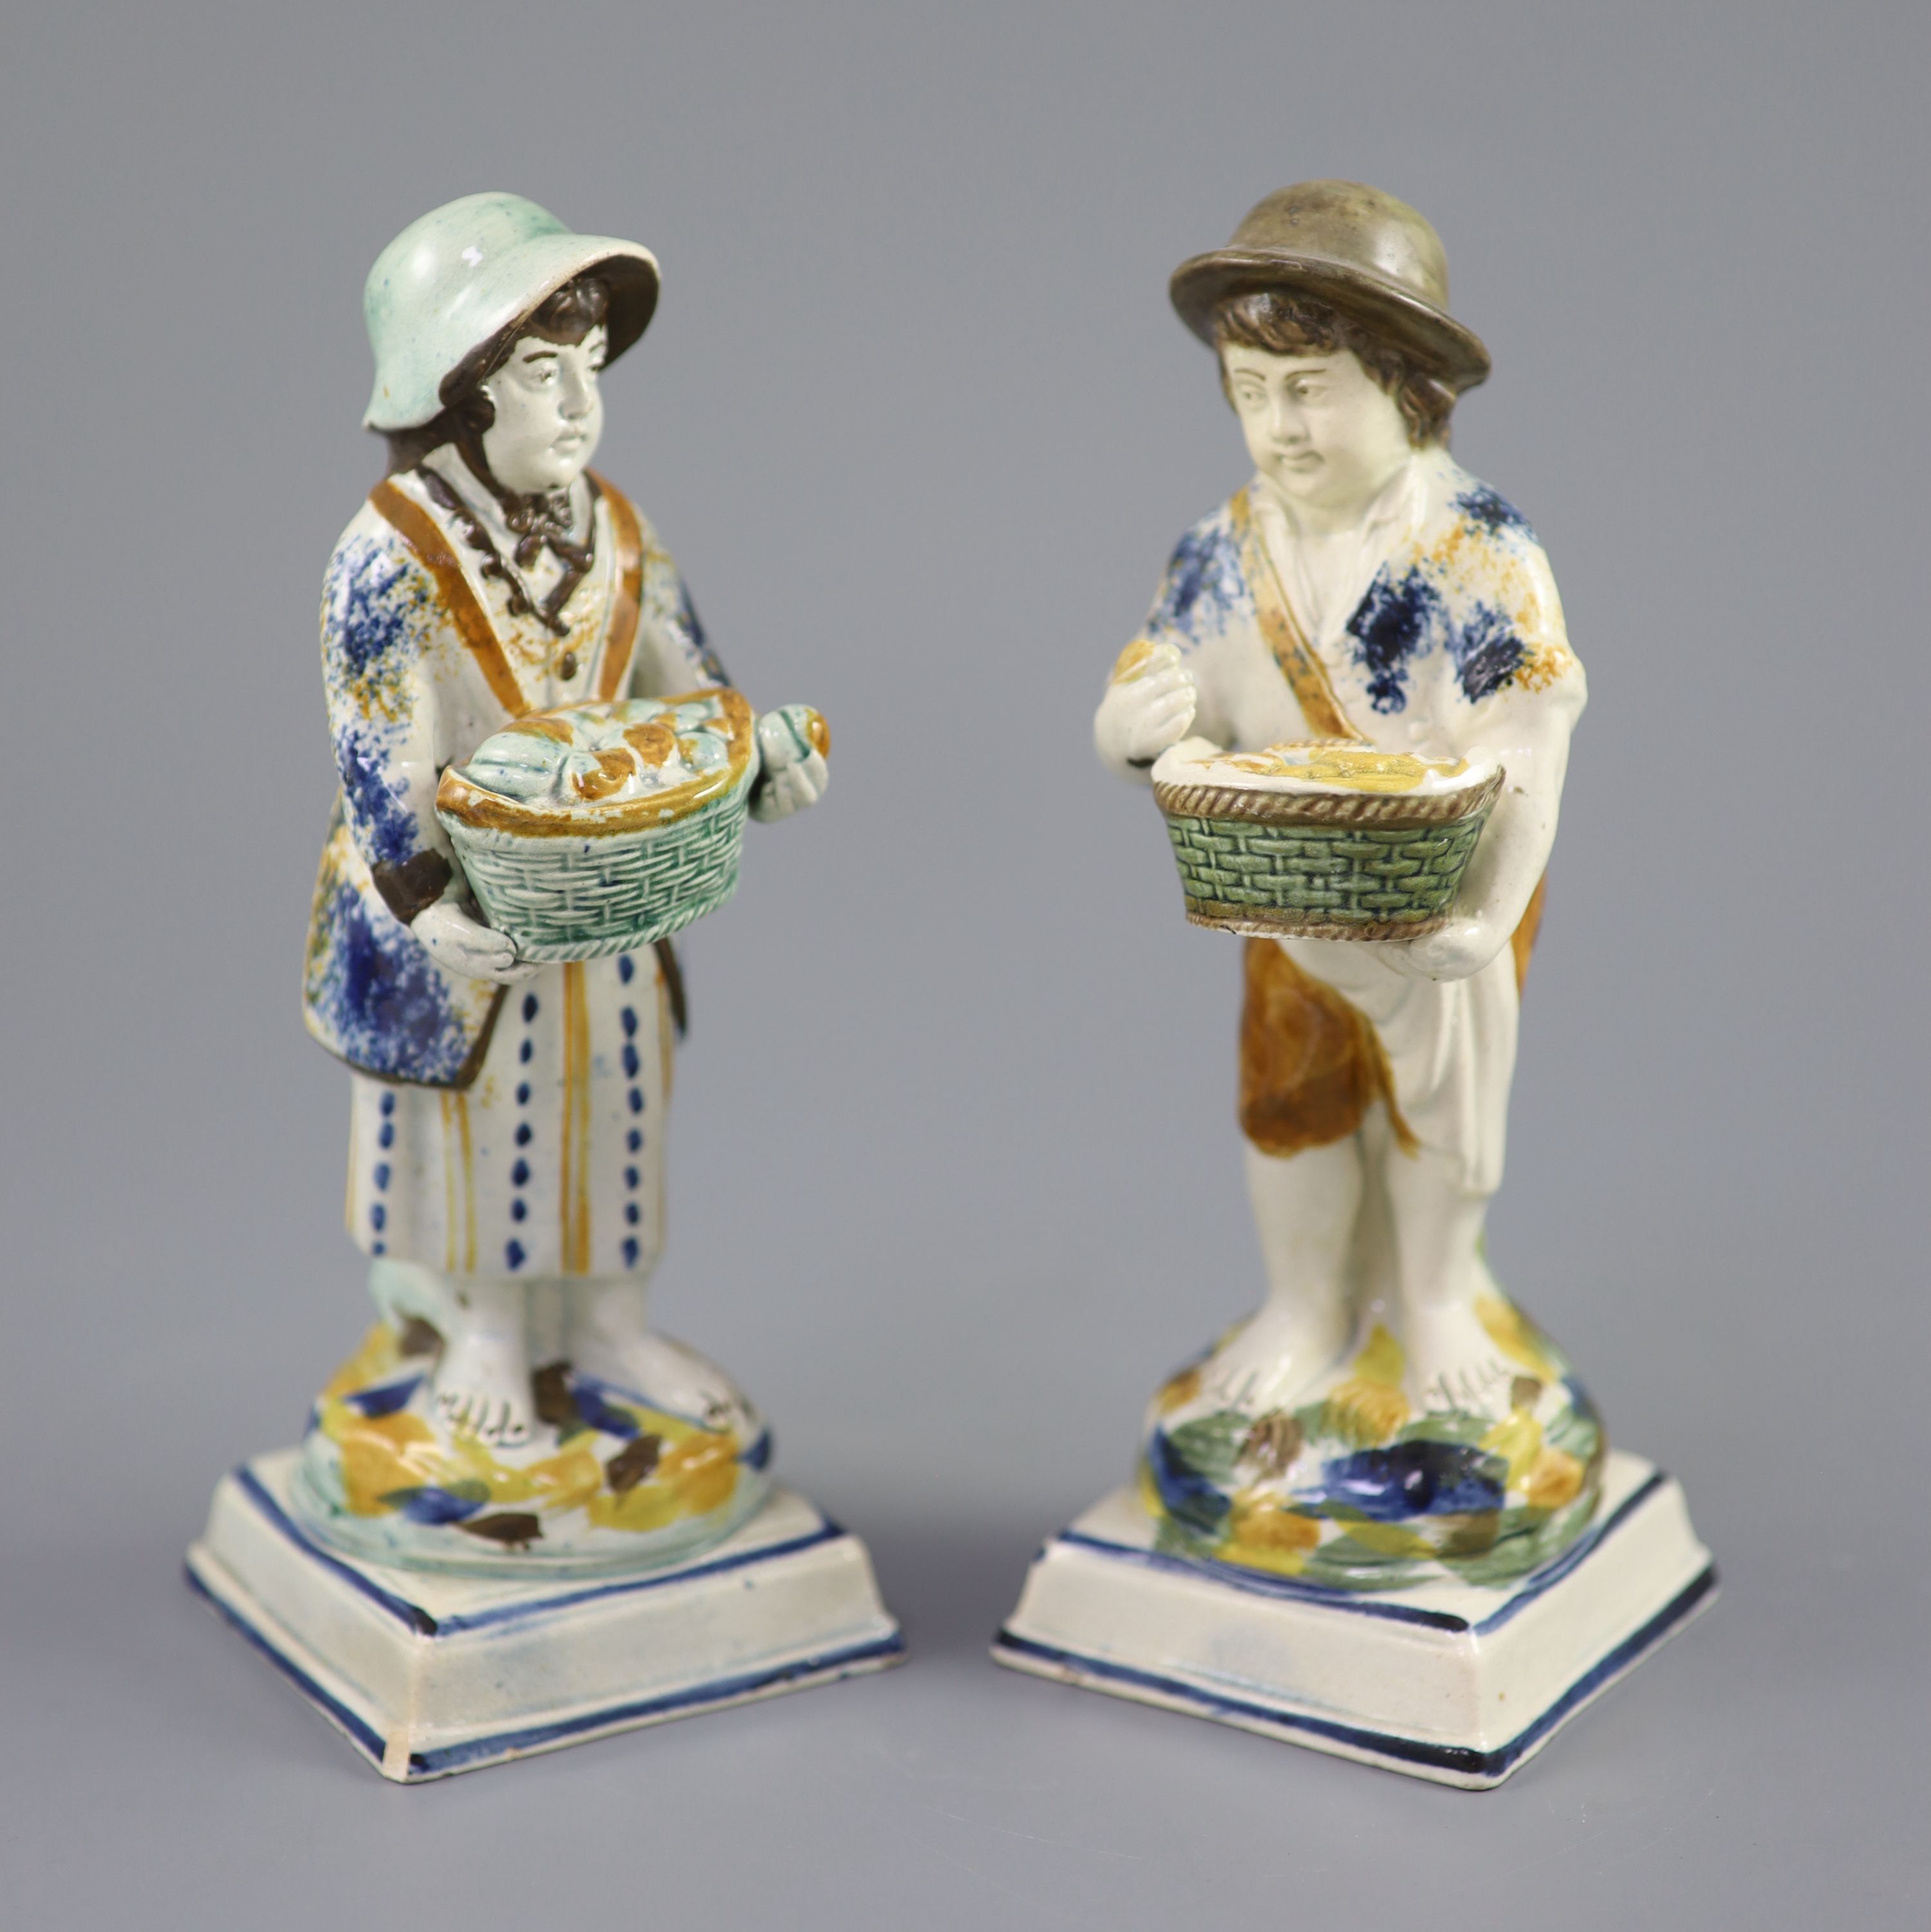 A pair of Prattware figures of fruit and biscuit street vendors, c.1790-1800, 17.5cm high